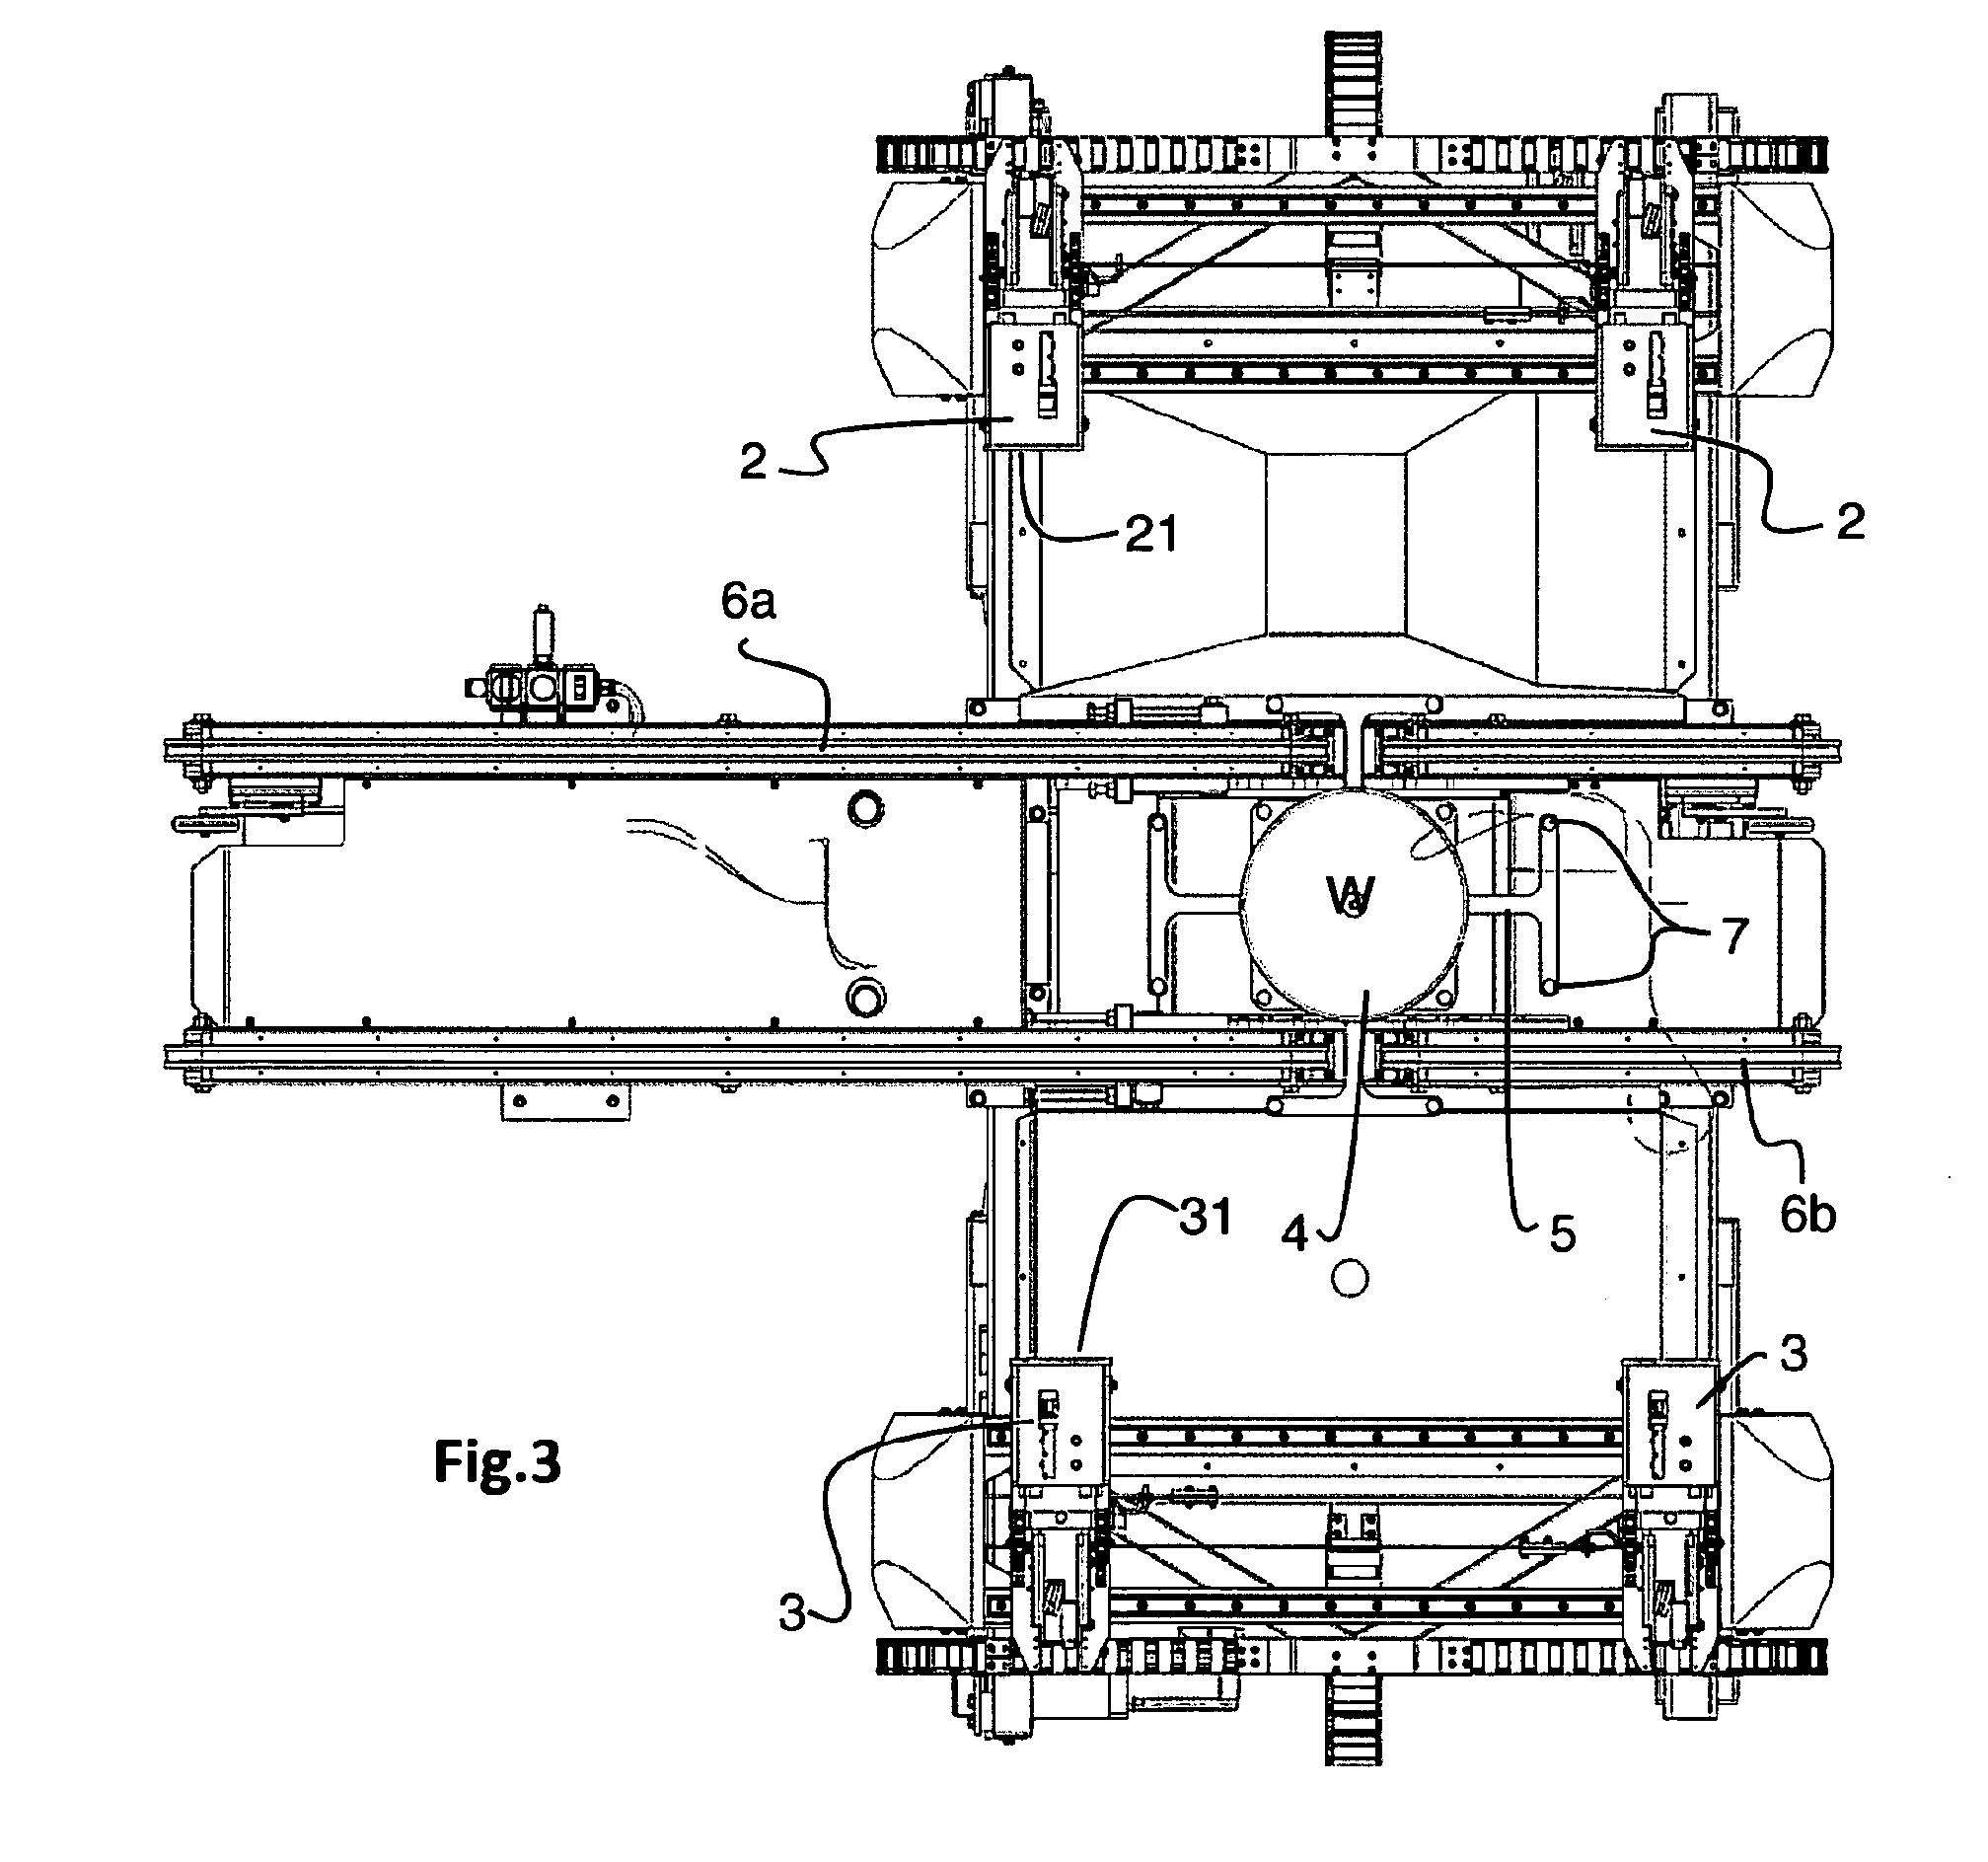 Device for cutting and removal of wires from bales